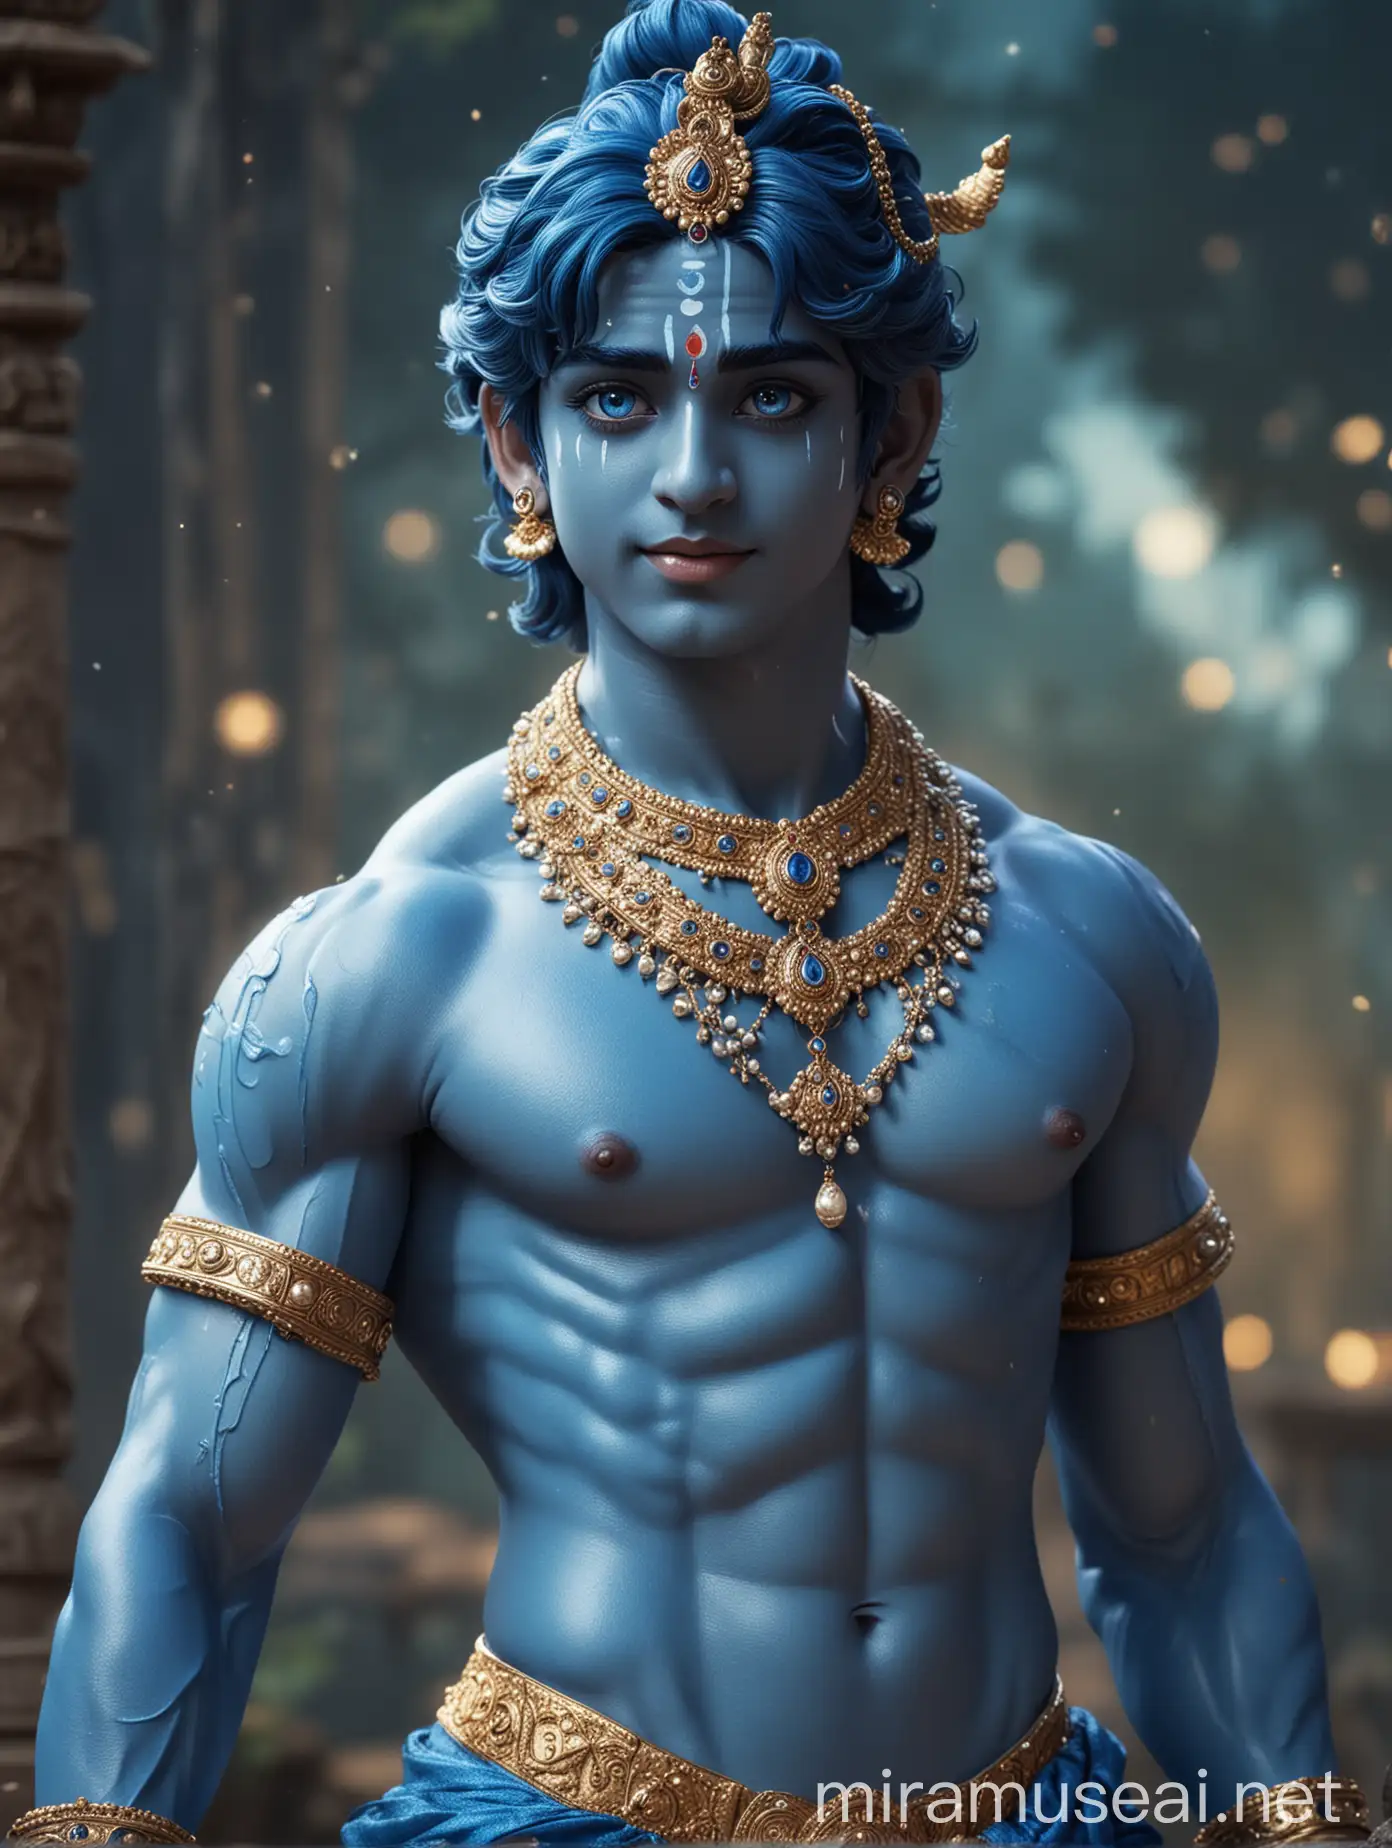 Lord Krishna, Handsome face, showing abs, blue body, blue eyes, the blue colour face, jawline face, blue skin, divine background, Lord Krishna diamond outfit, Lord Krishna makeup, Japanese anime, full body photo, standing pose, smile, face facing the camera,ultra HD 4k 